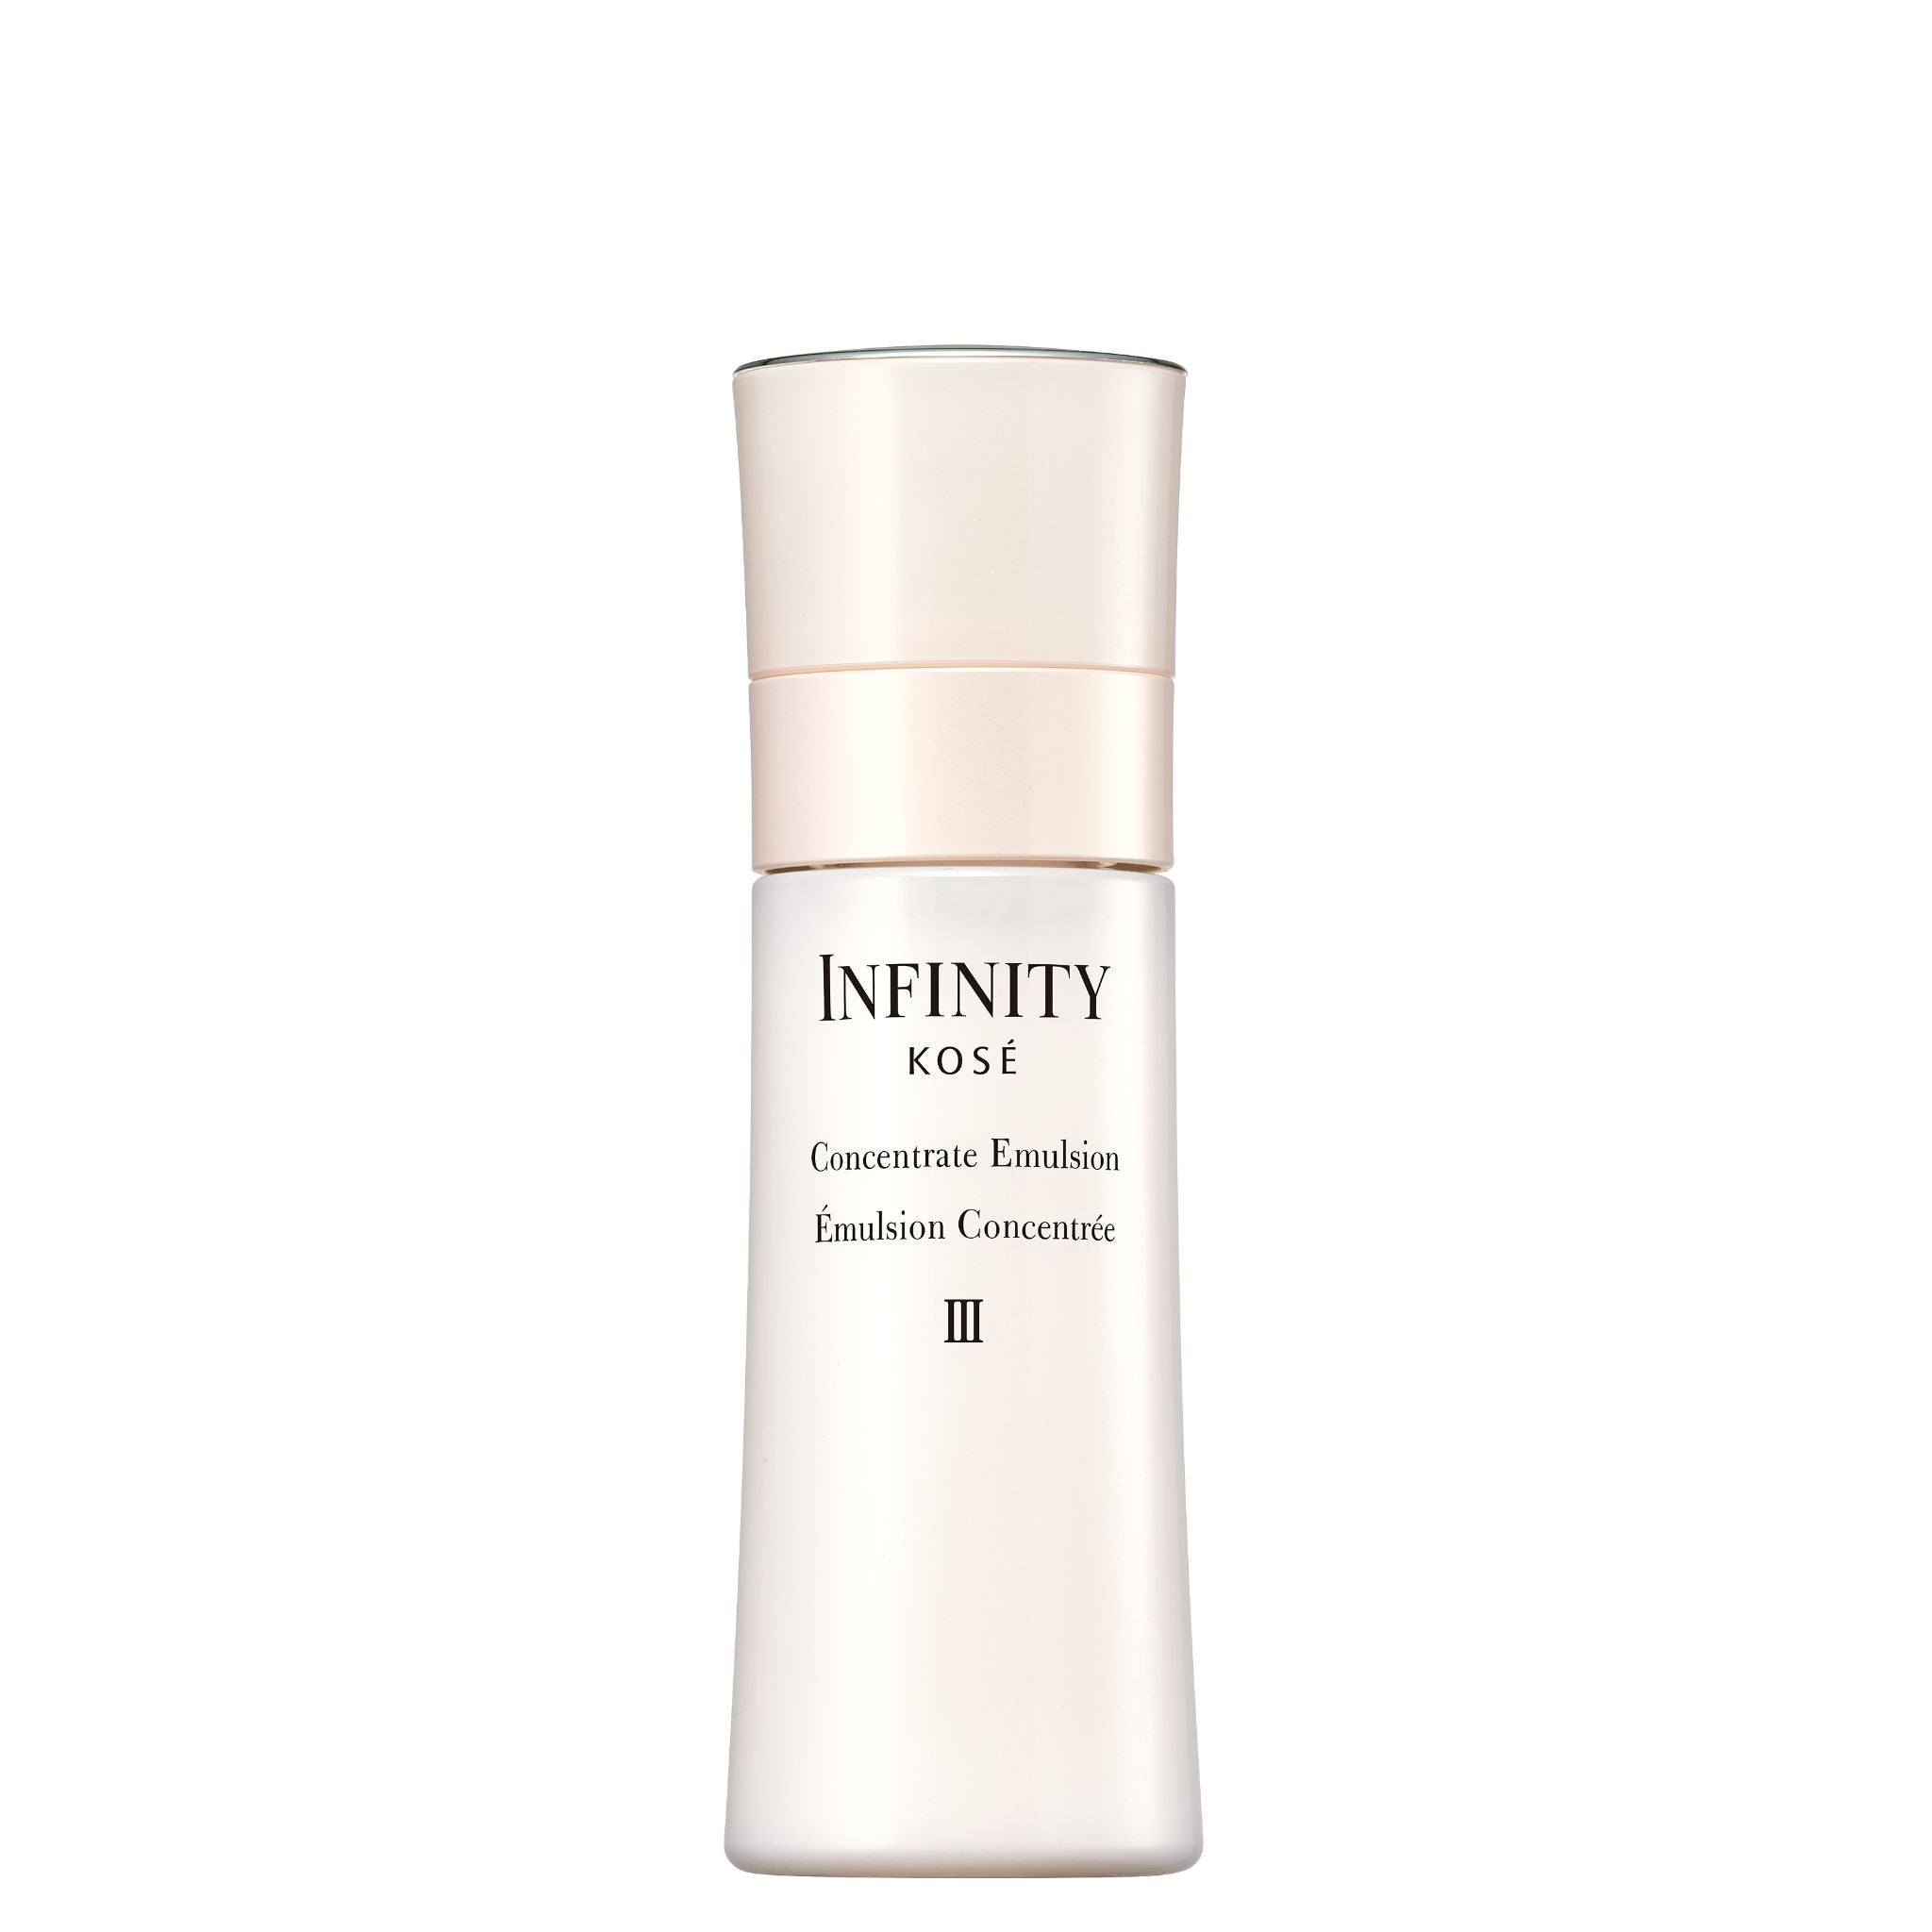 Kose INFINITY Concentrate Emulsion III 120ml